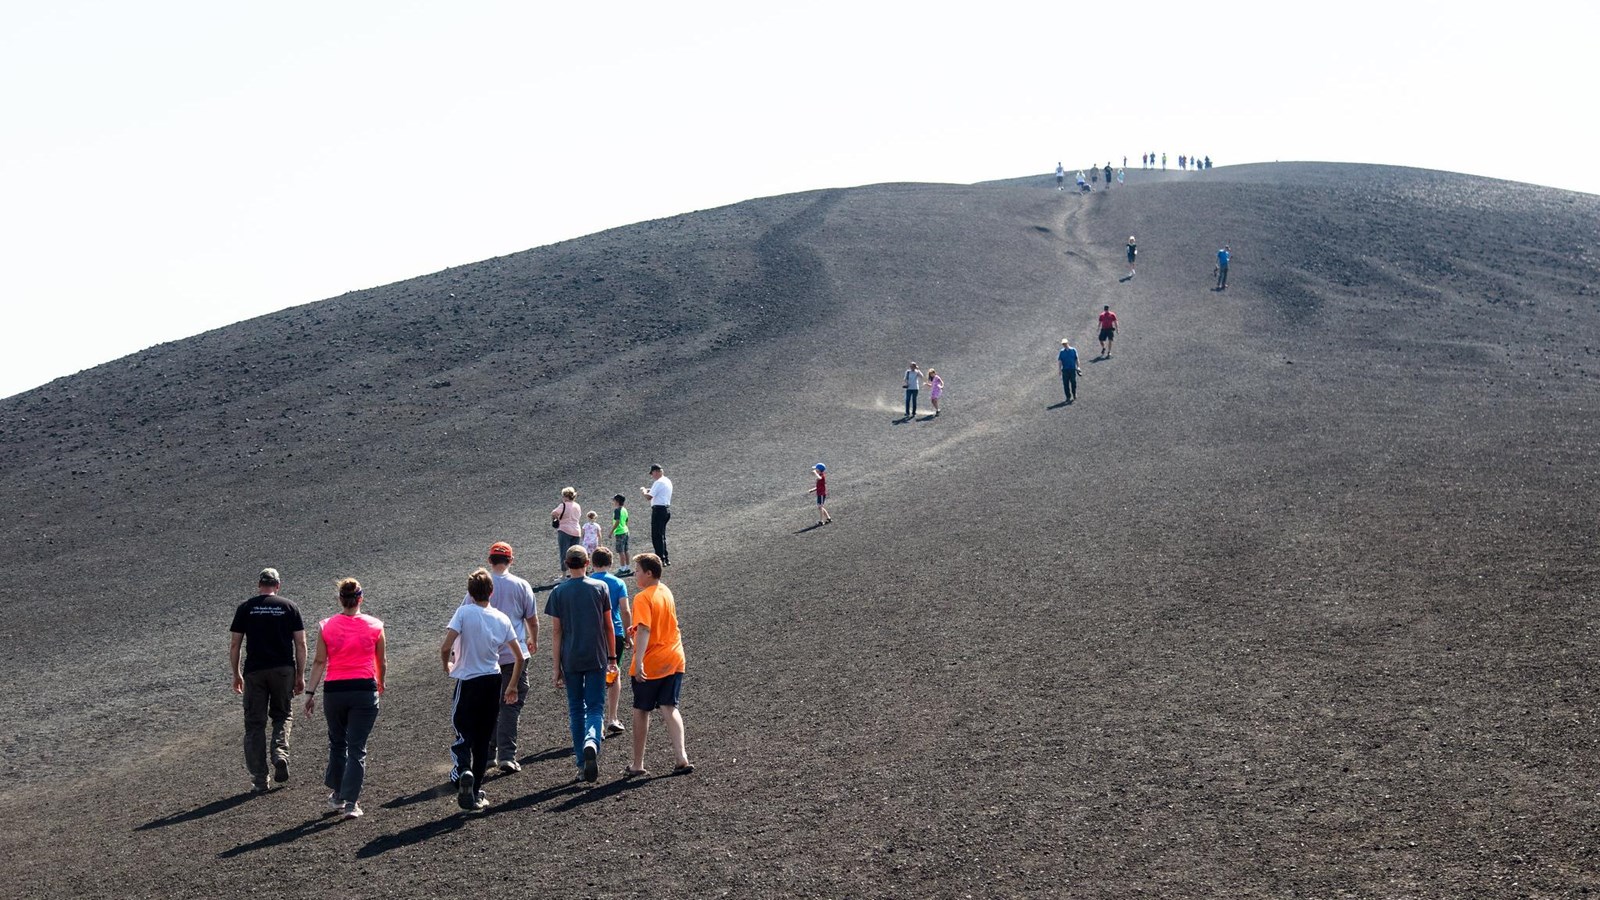 Hikers head up a steep trail on the barren side of a cinder cone.